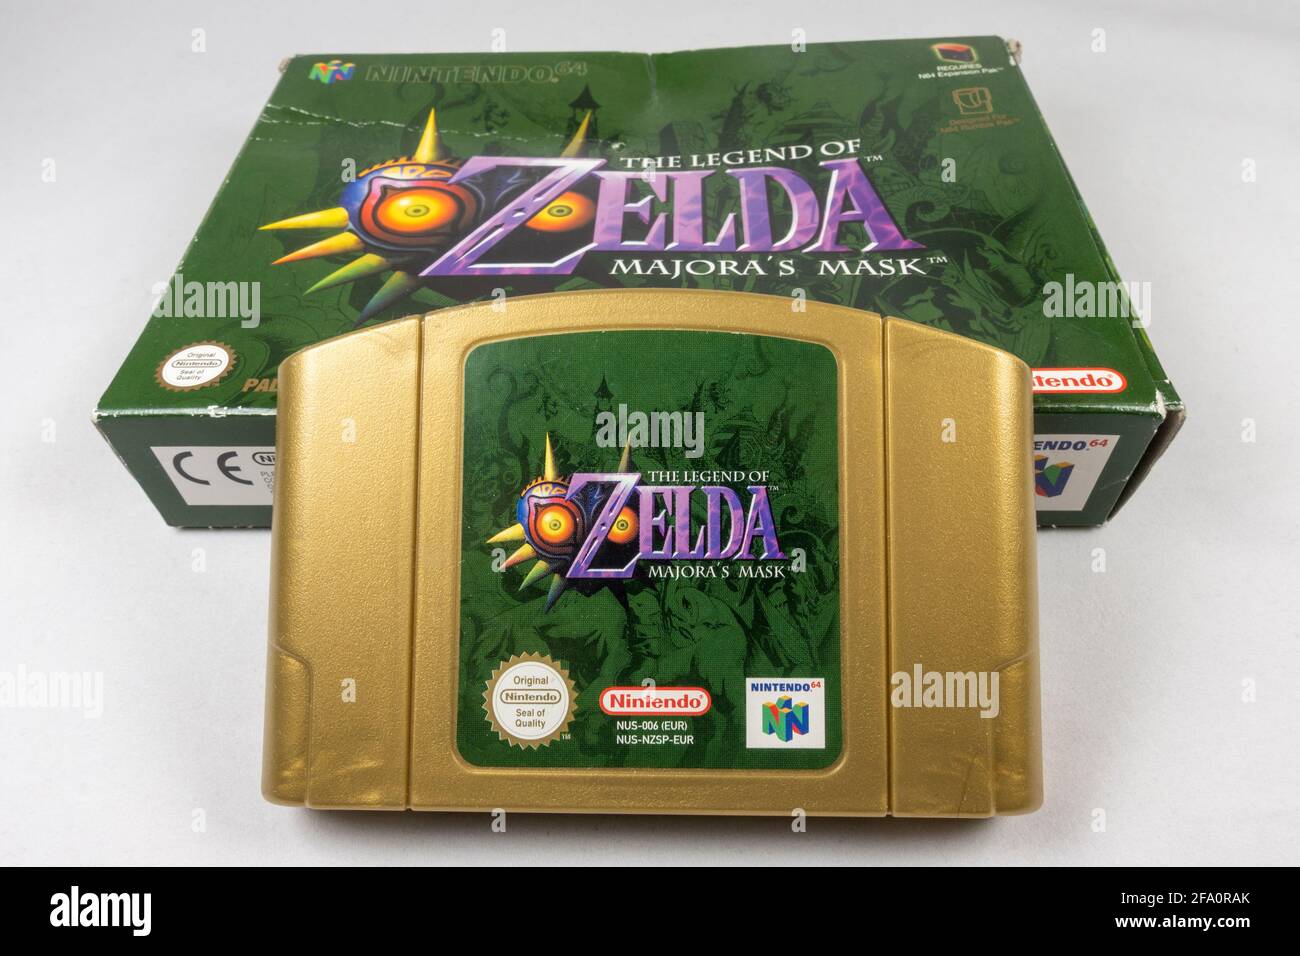 Tilladelse Fakultet lindre The Legend of Zelda: Majora's Mask Nintendo 64 or N64 video game cartridge  and box, a fifth generation video game console launched in 1996 in Japan  Stock Photo - Alamy